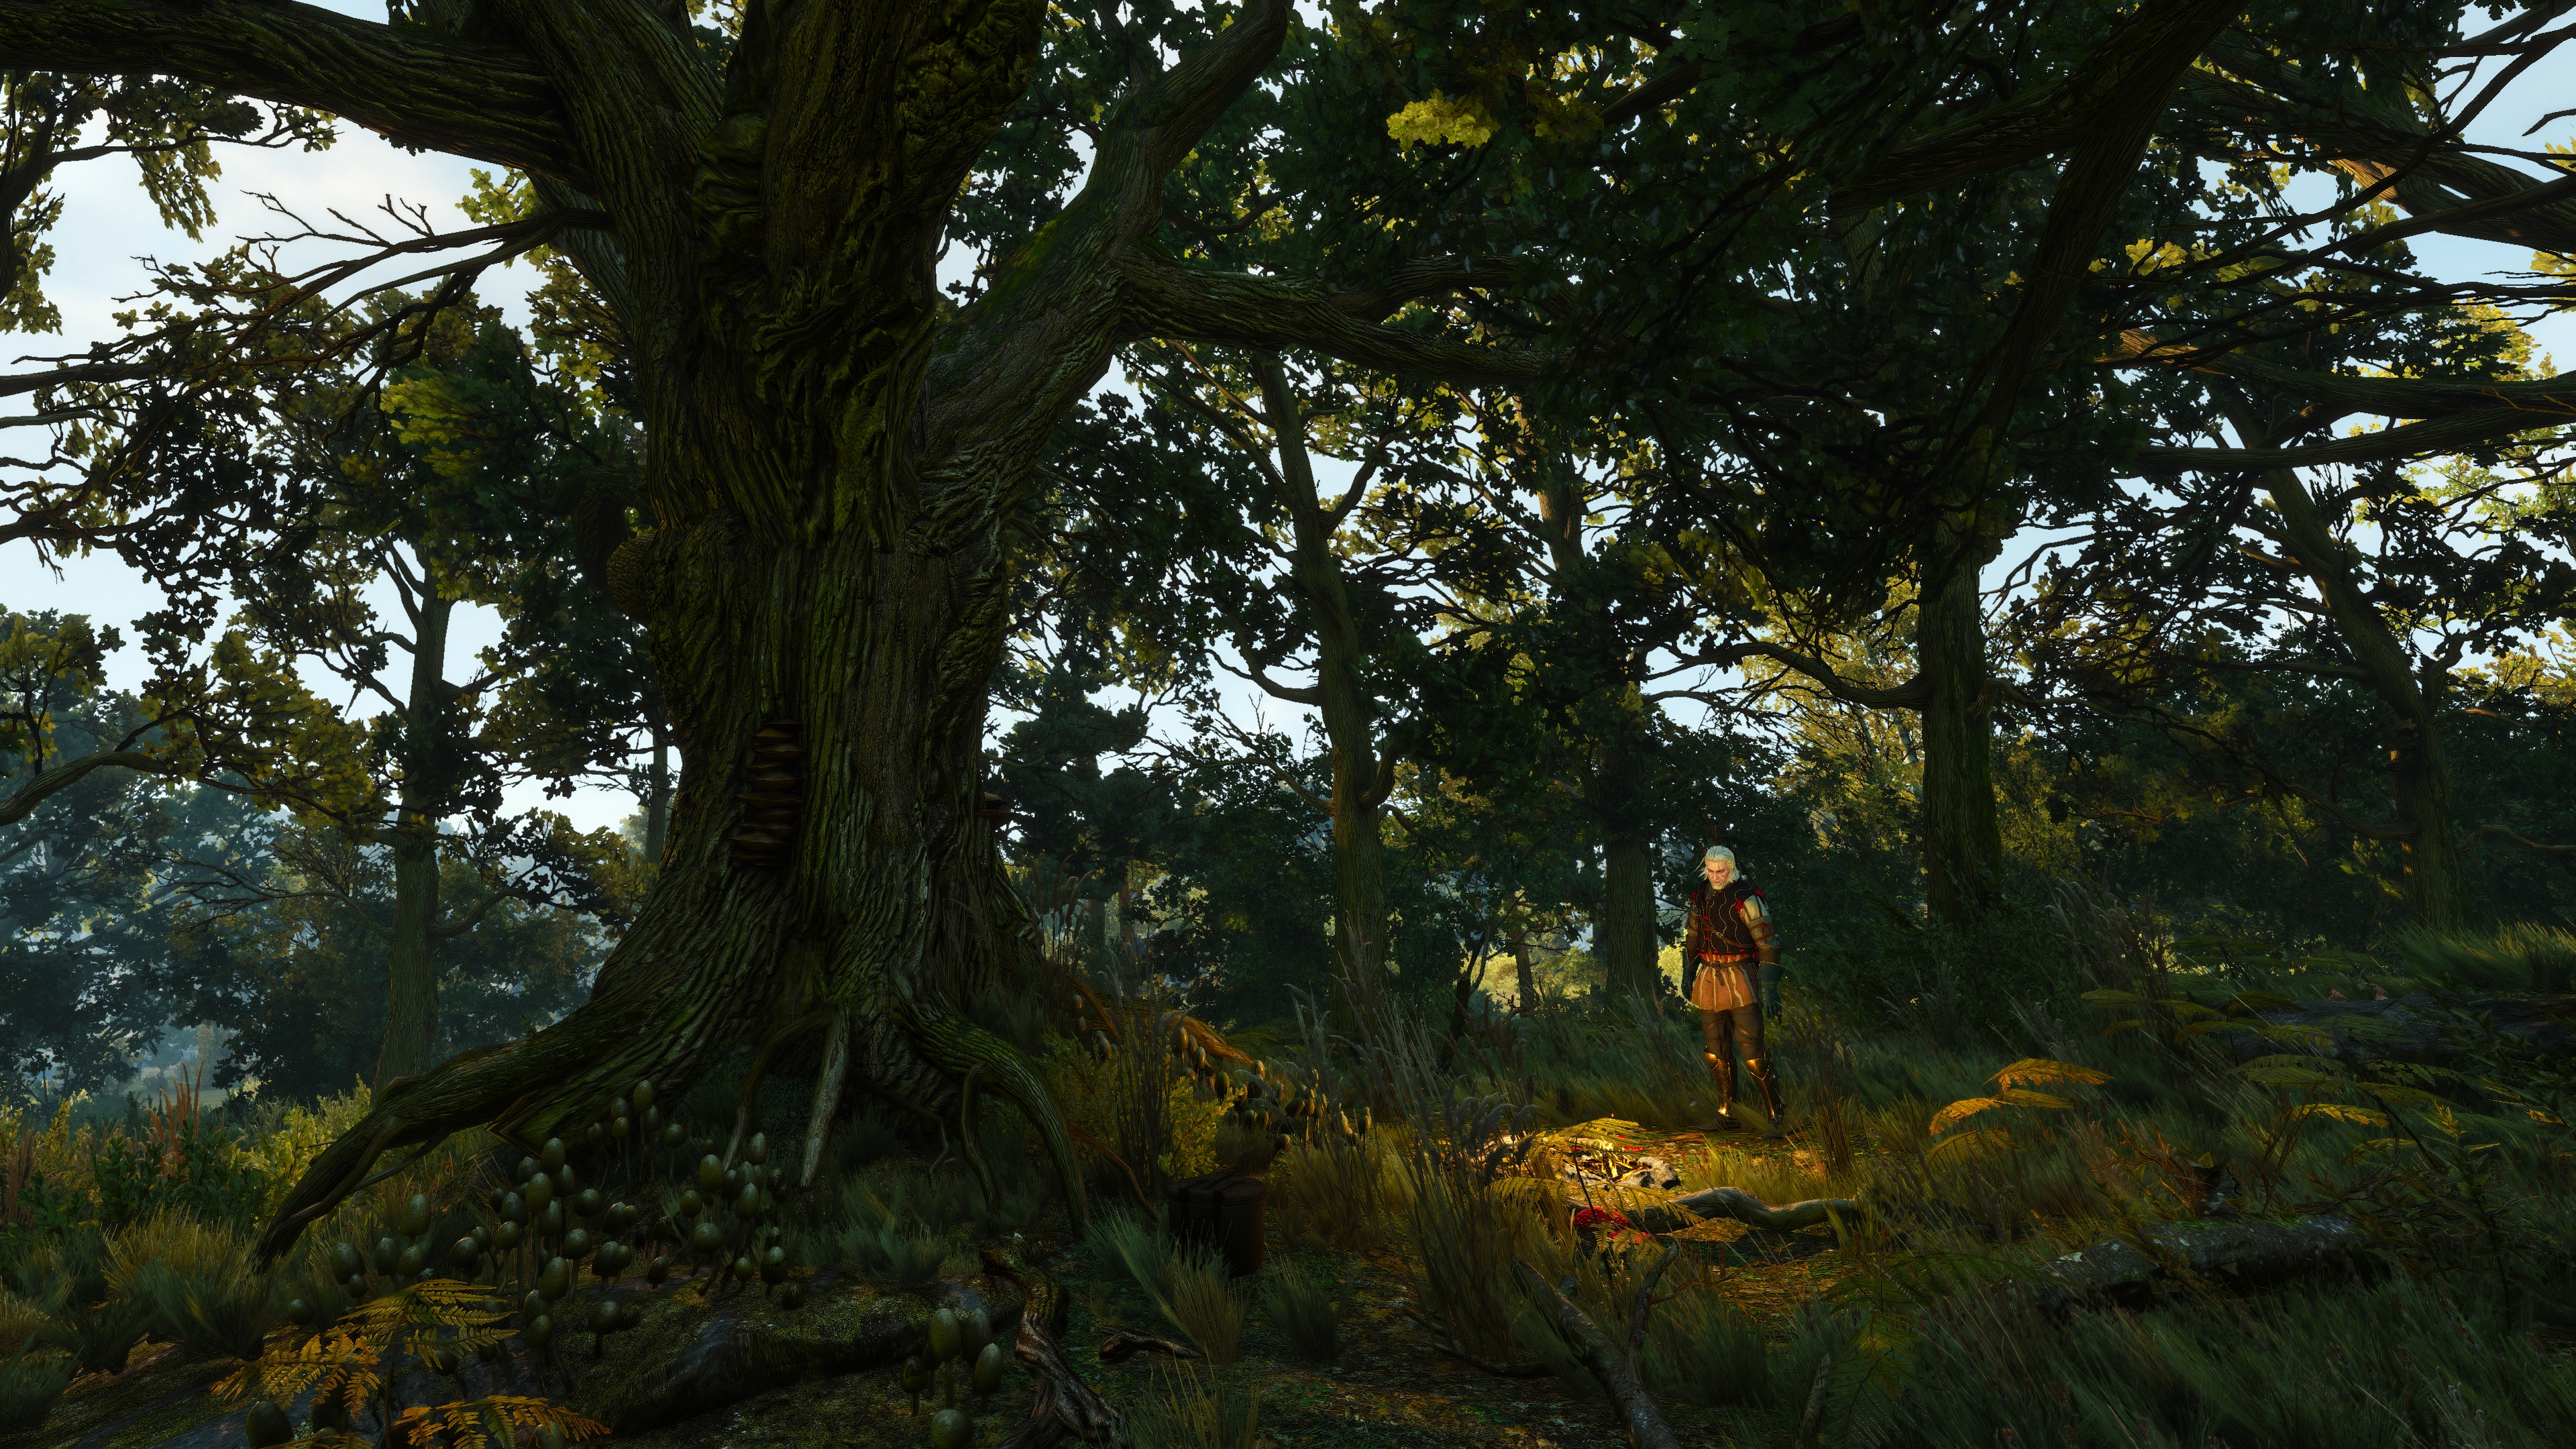 General 3840x2160 The Witcher 3: Wild Hunt PC gaming screen shot forest Geralt of Rivia video game art sunlight video games nature video game characters CGI video game men standing trees mushroom plants